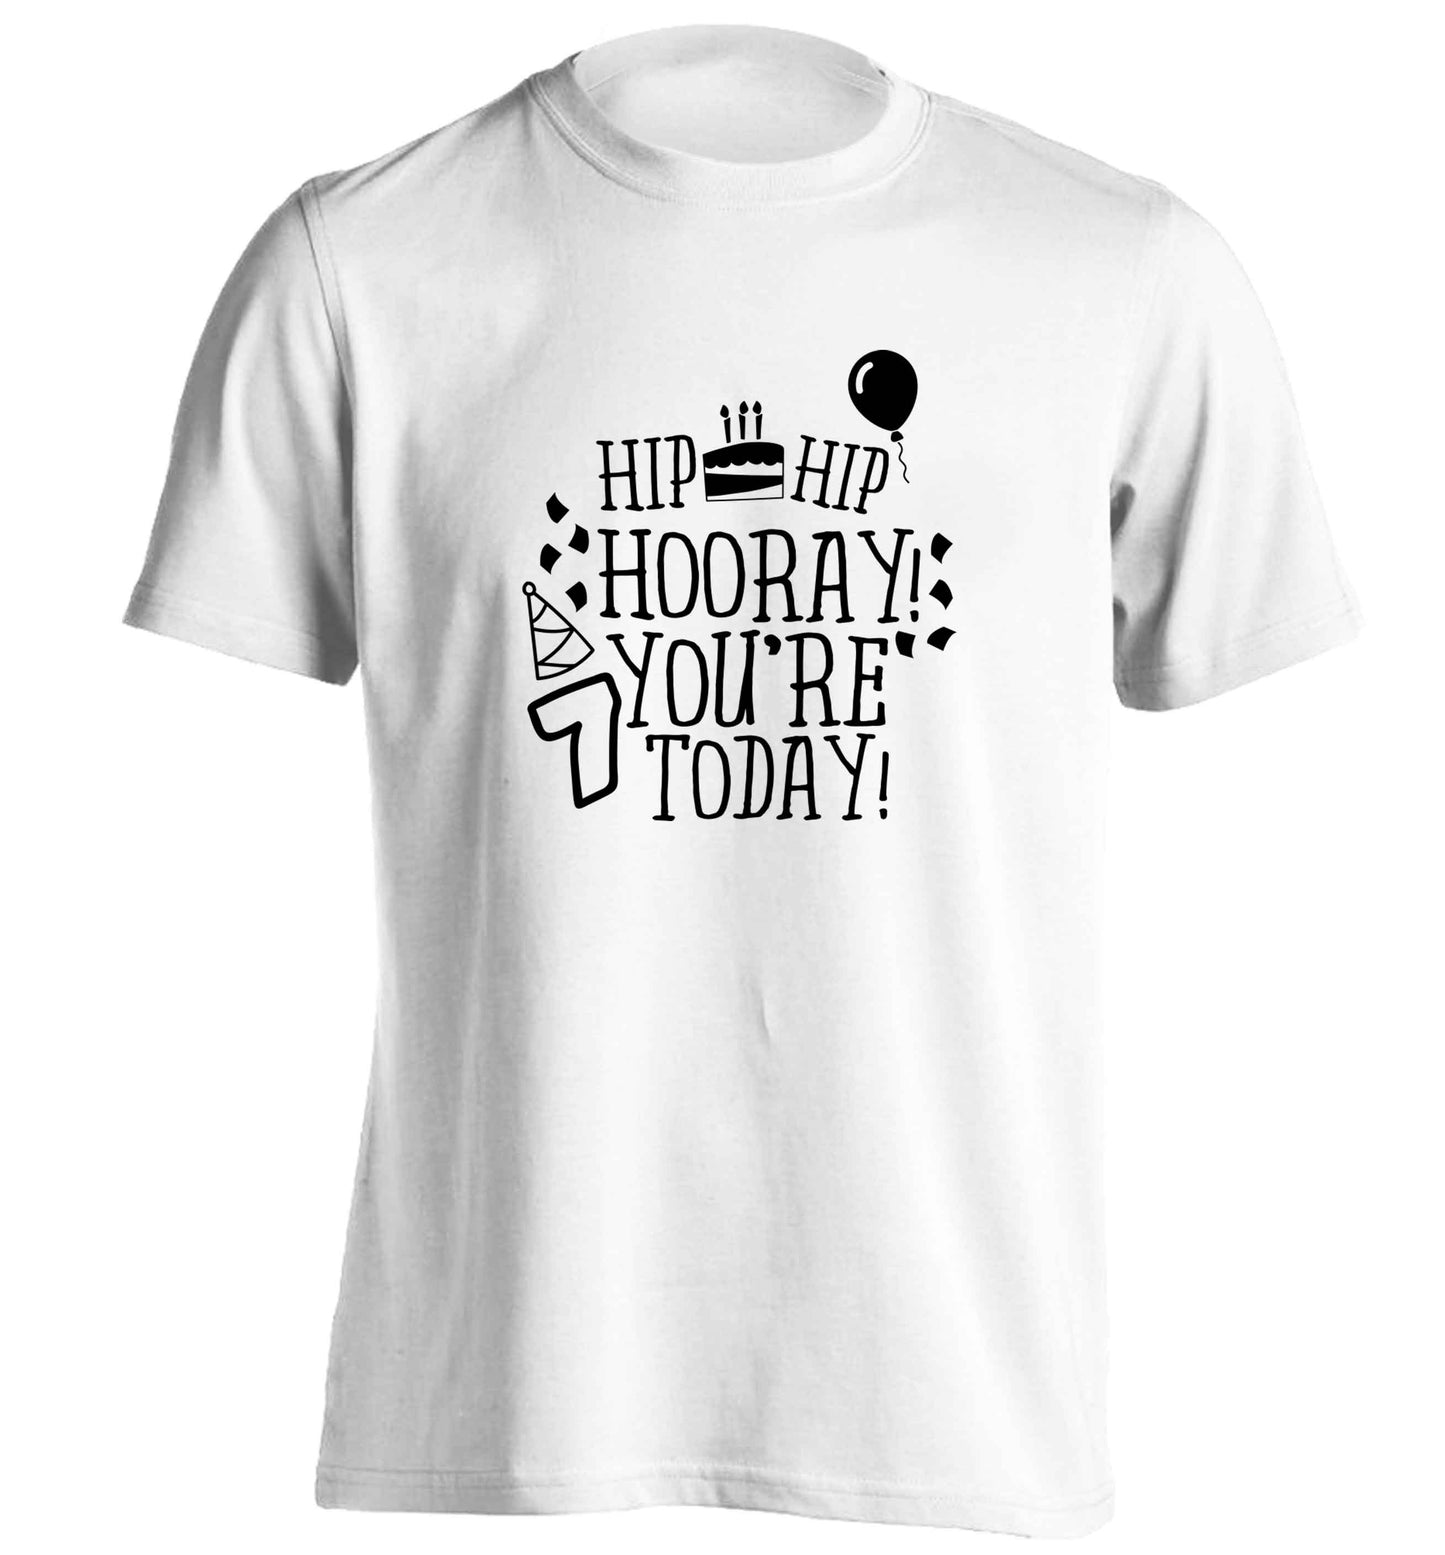 Hip hip hooray you're seven today! adults unisex white Tshirt 2XL